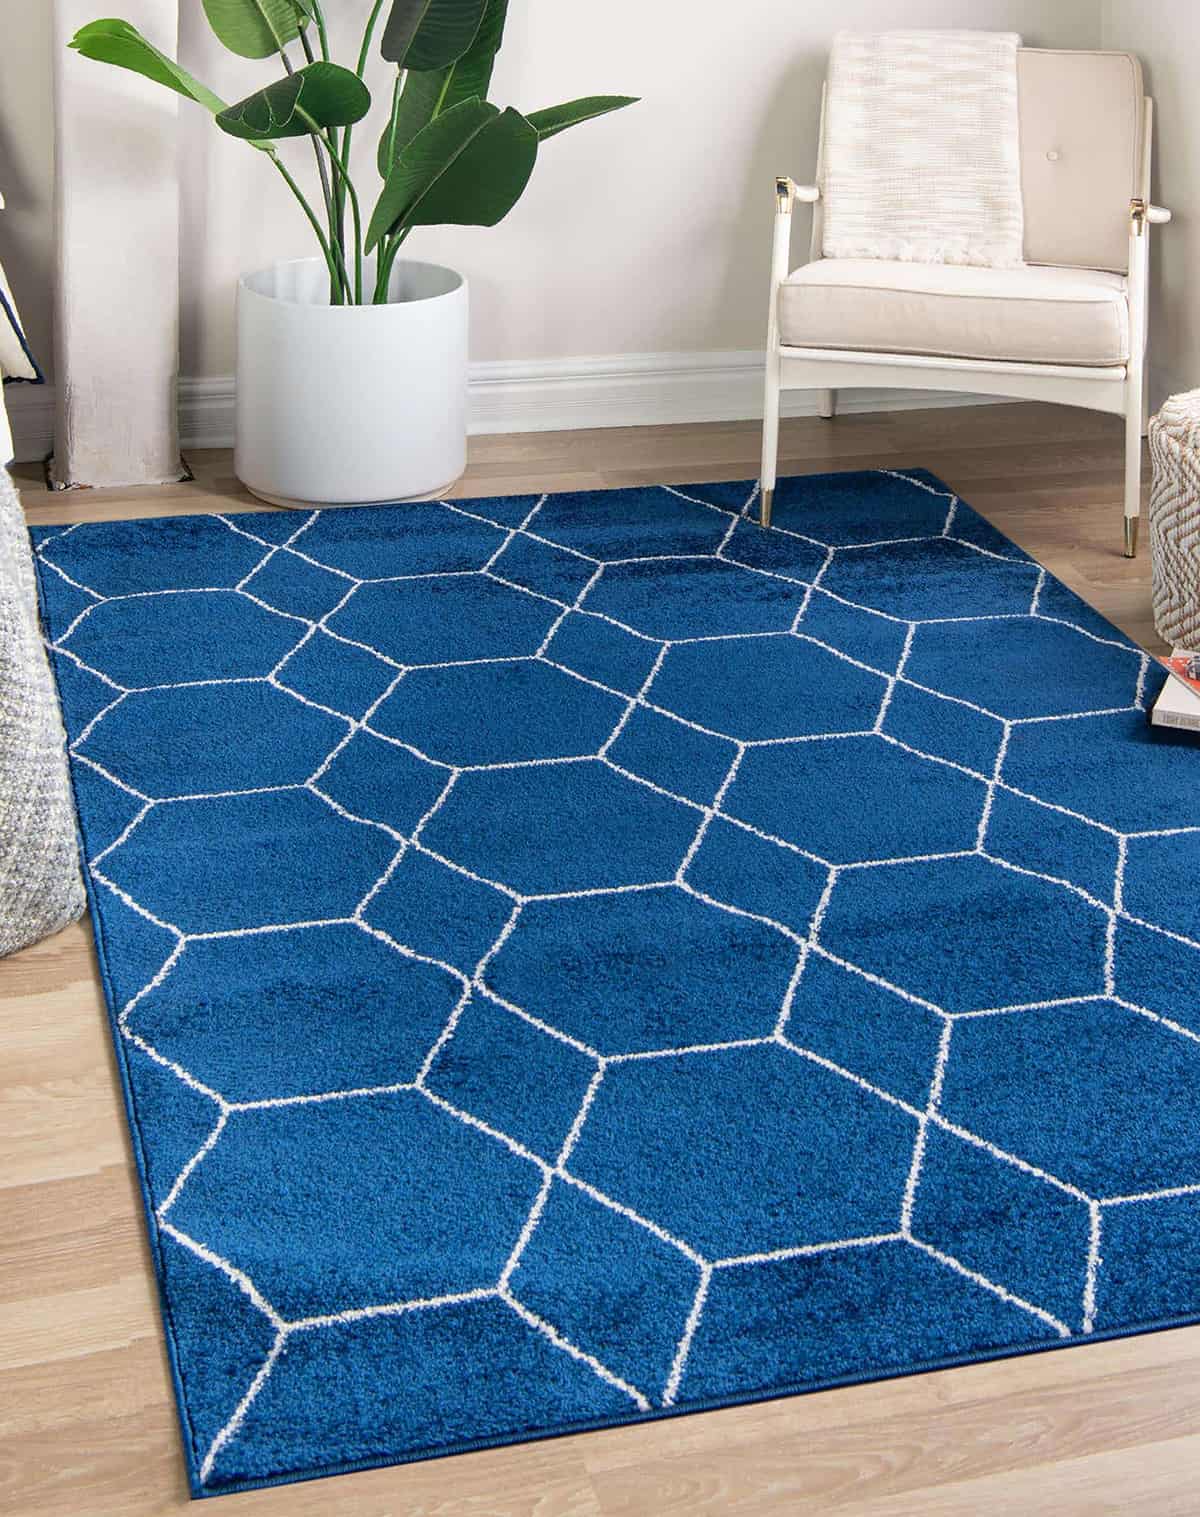 Blue Rug and Light Wooden Floors